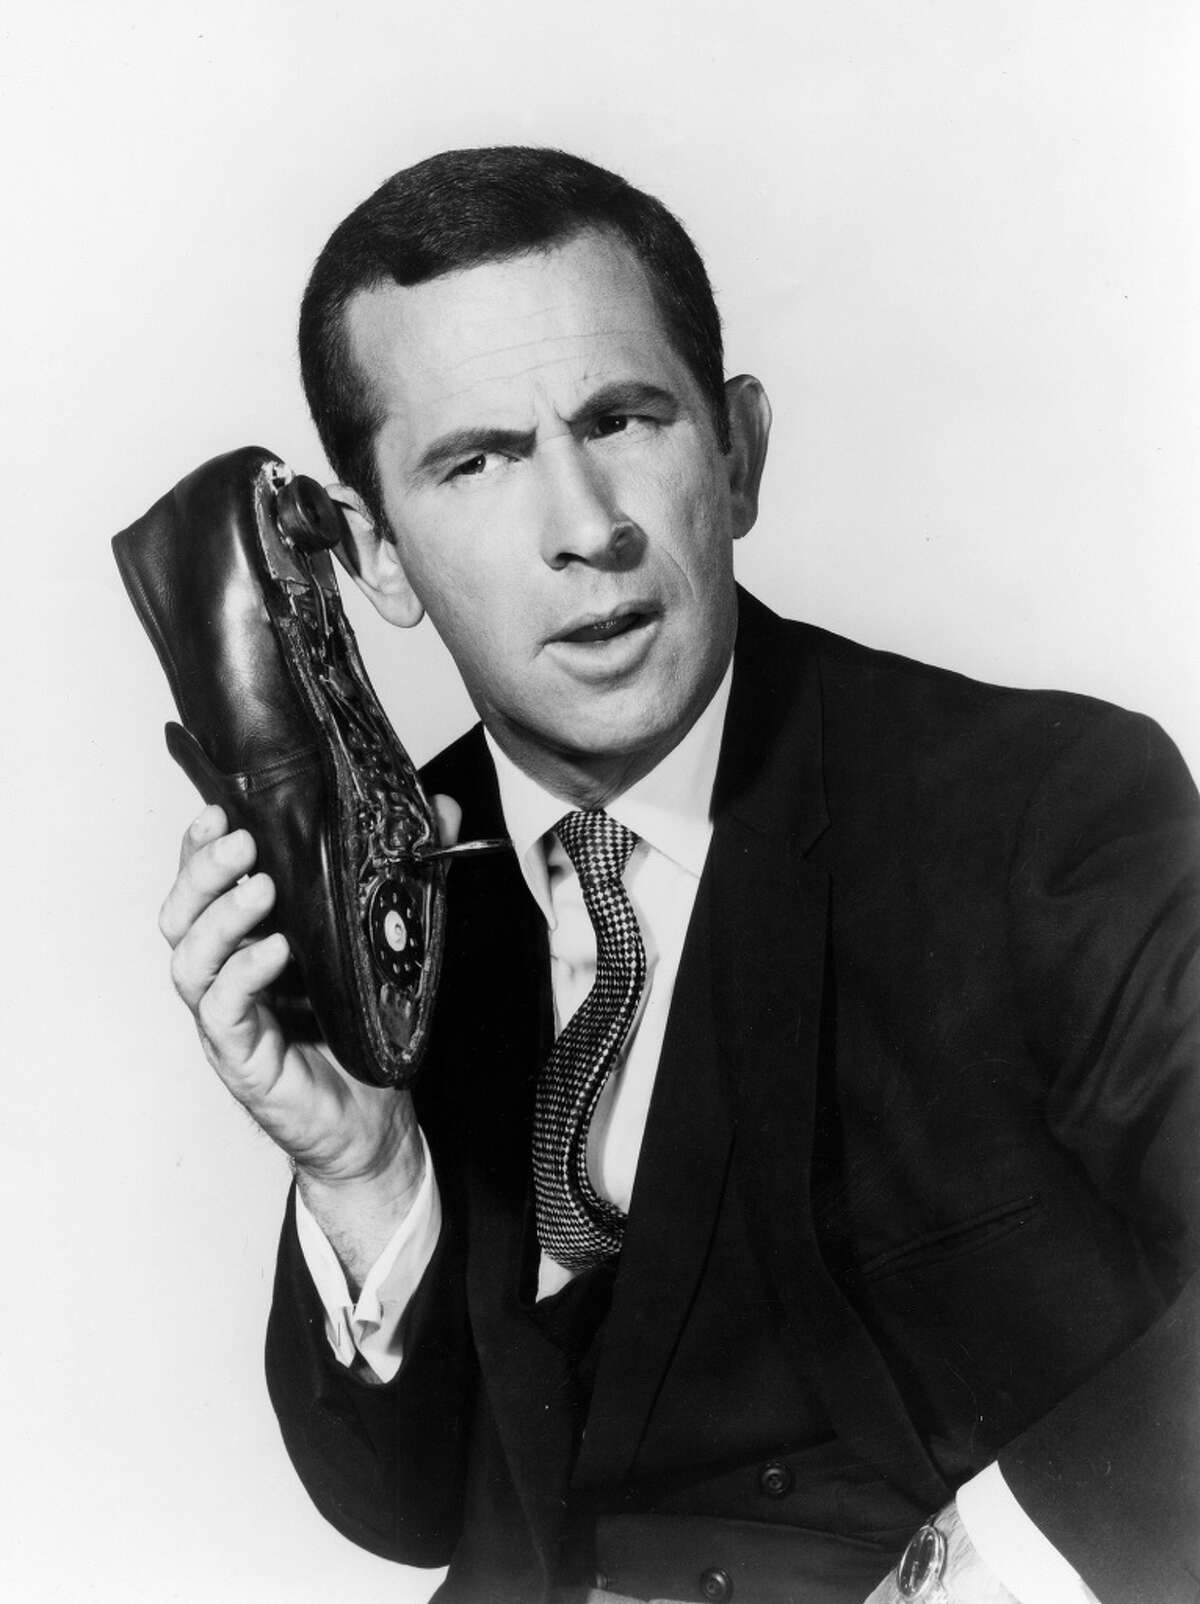 Don Adams' shoe phone from "Get Smart."